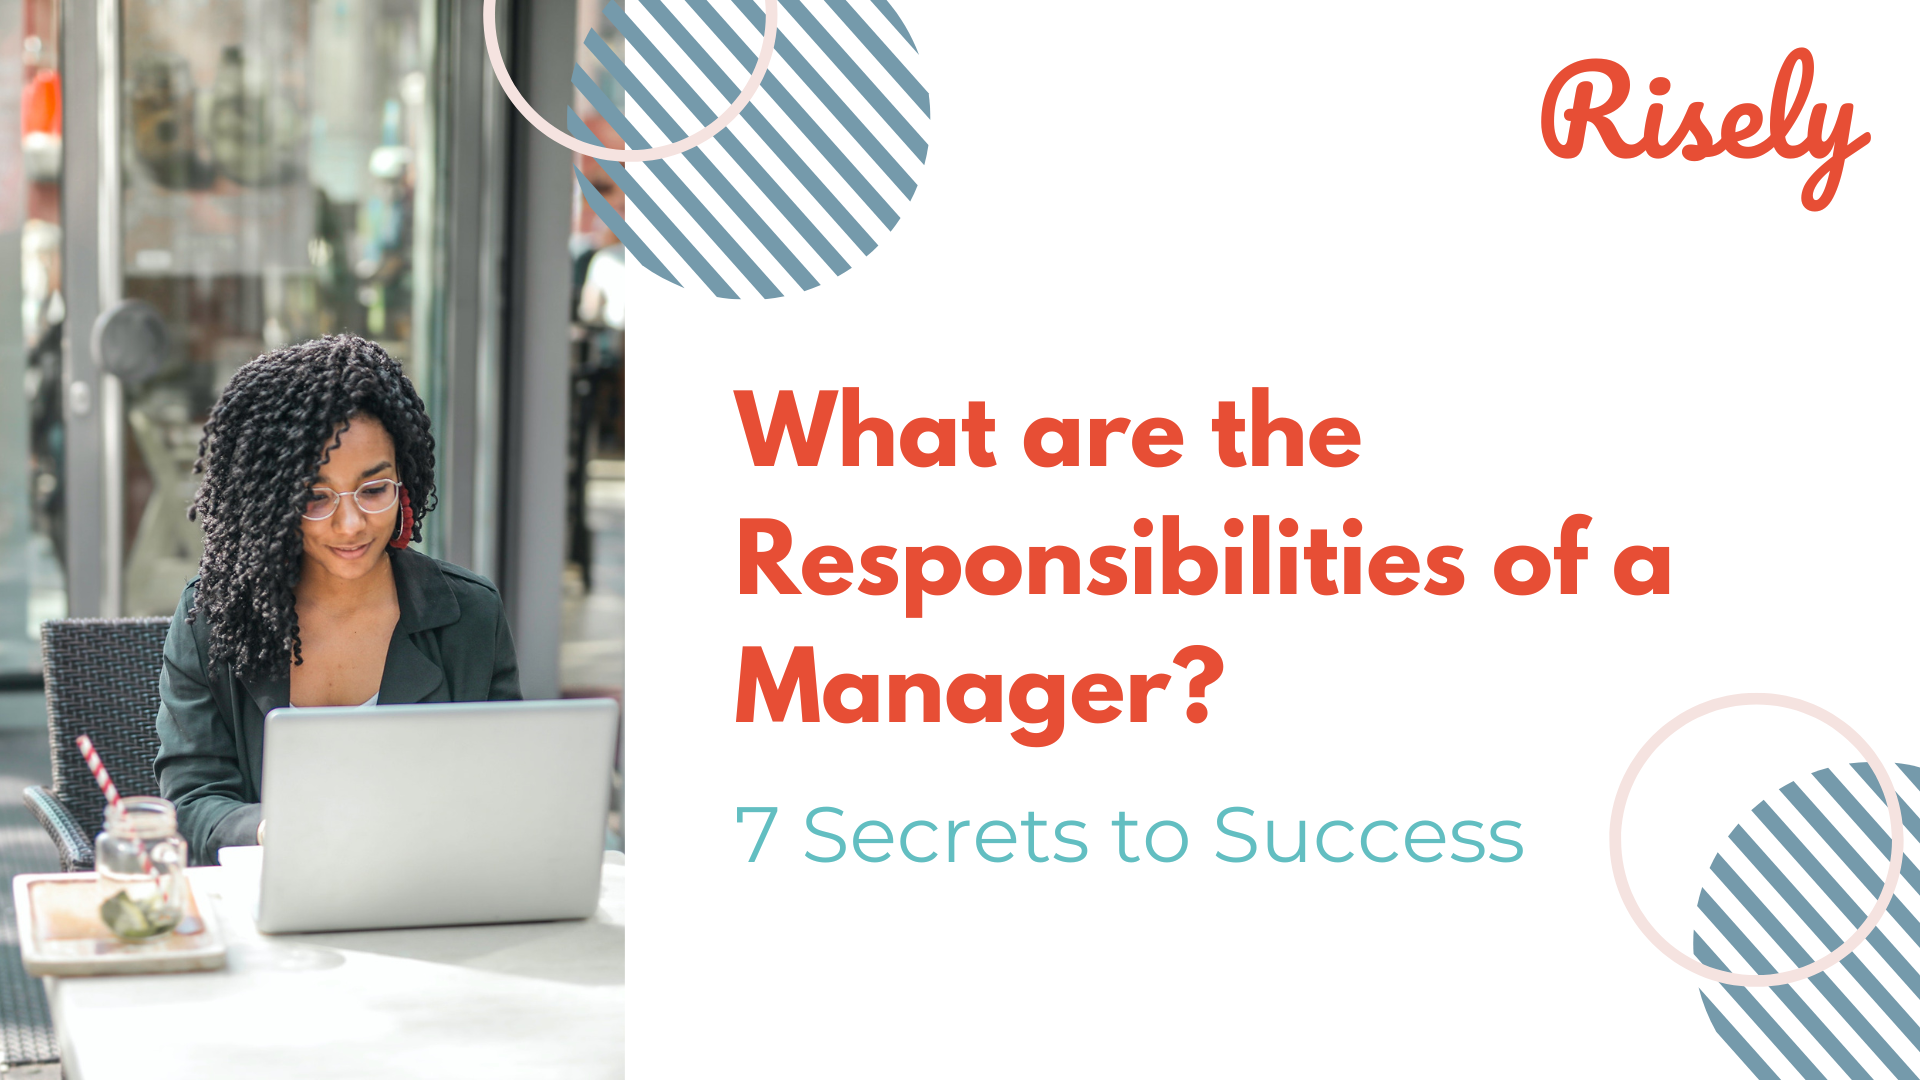 What are the Responsibilities of a Manager? 7 Secrets to Success